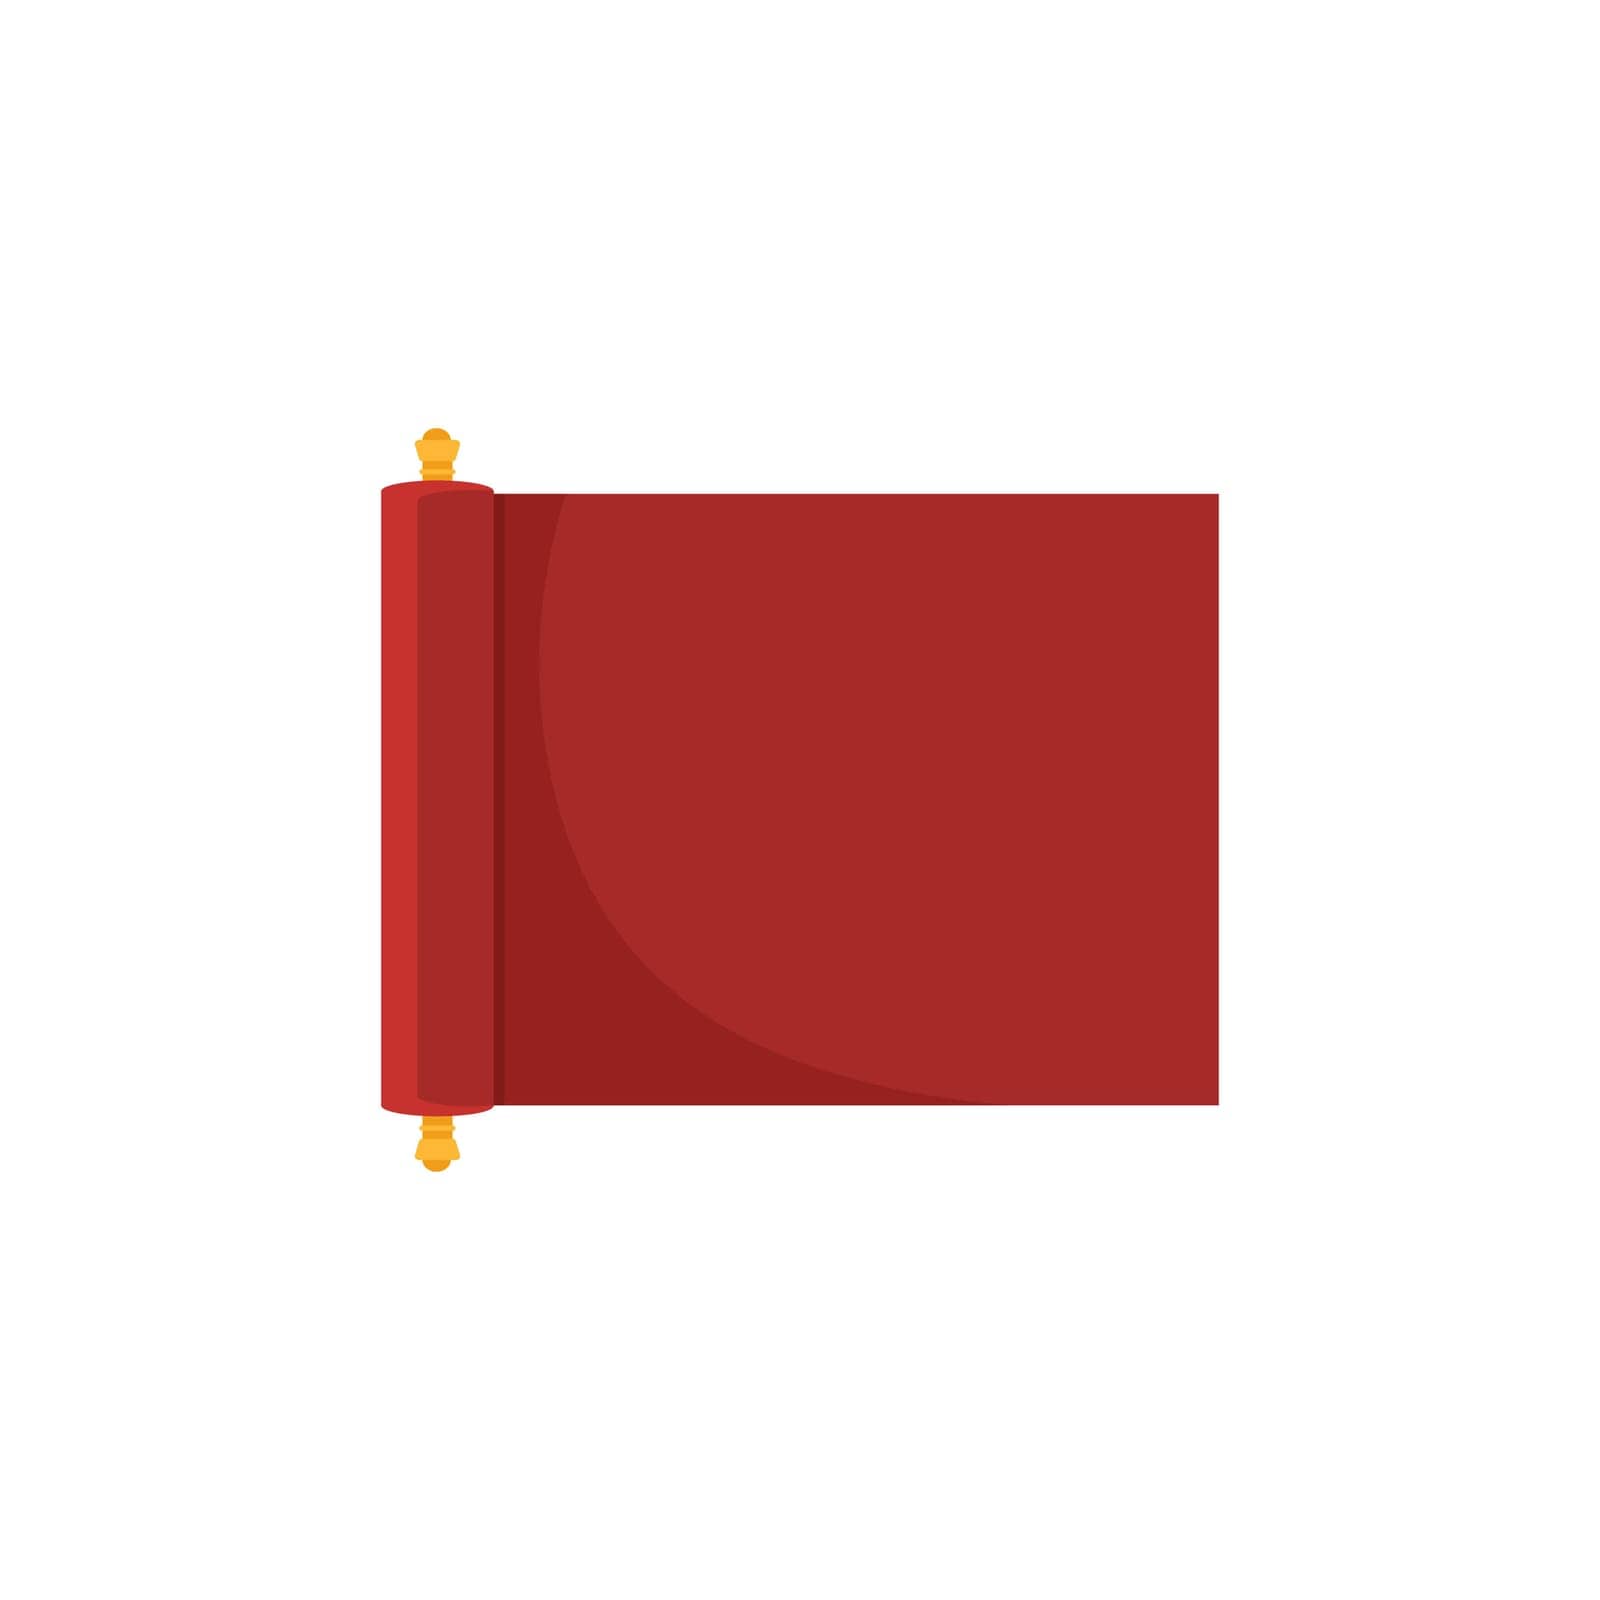 Chinese red blank scroll by Popov